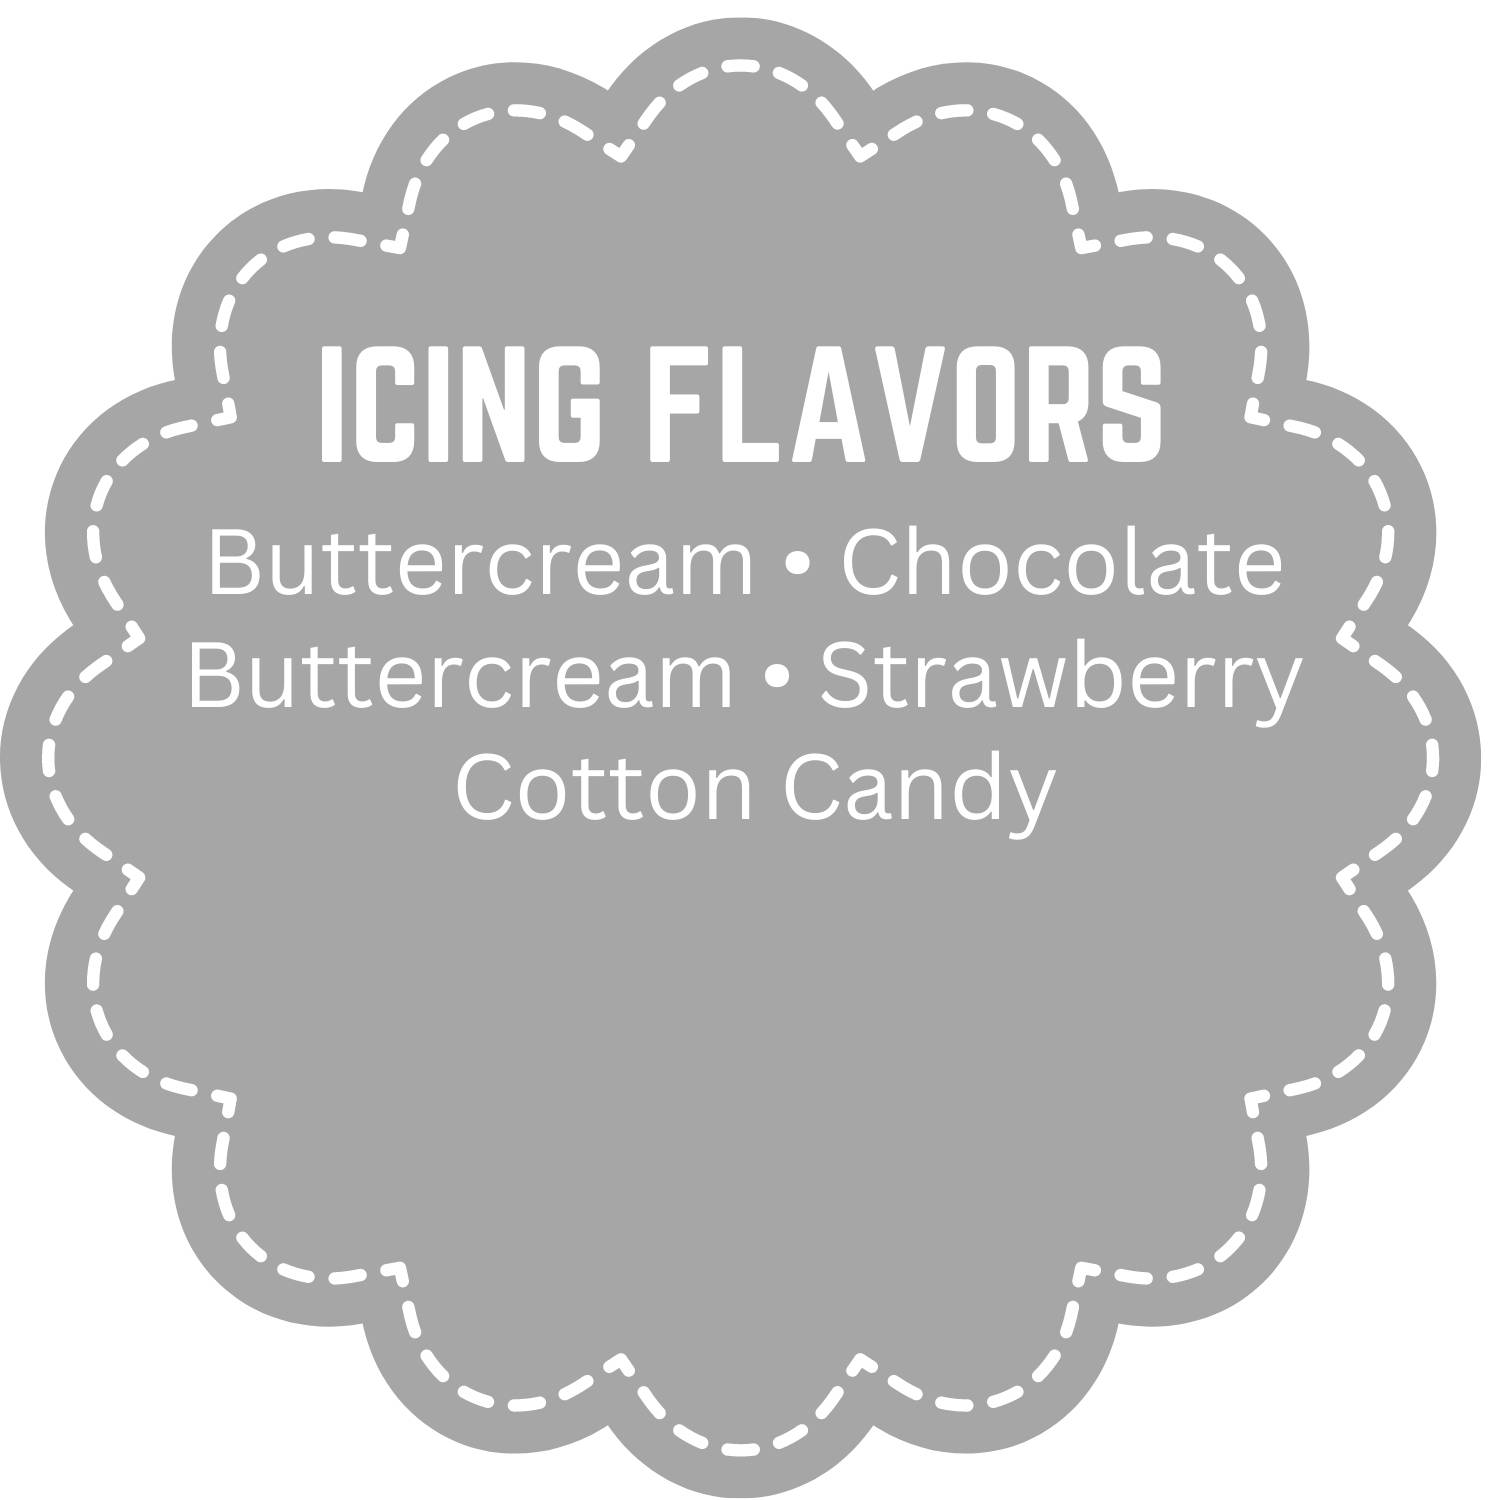 Icing Flavors